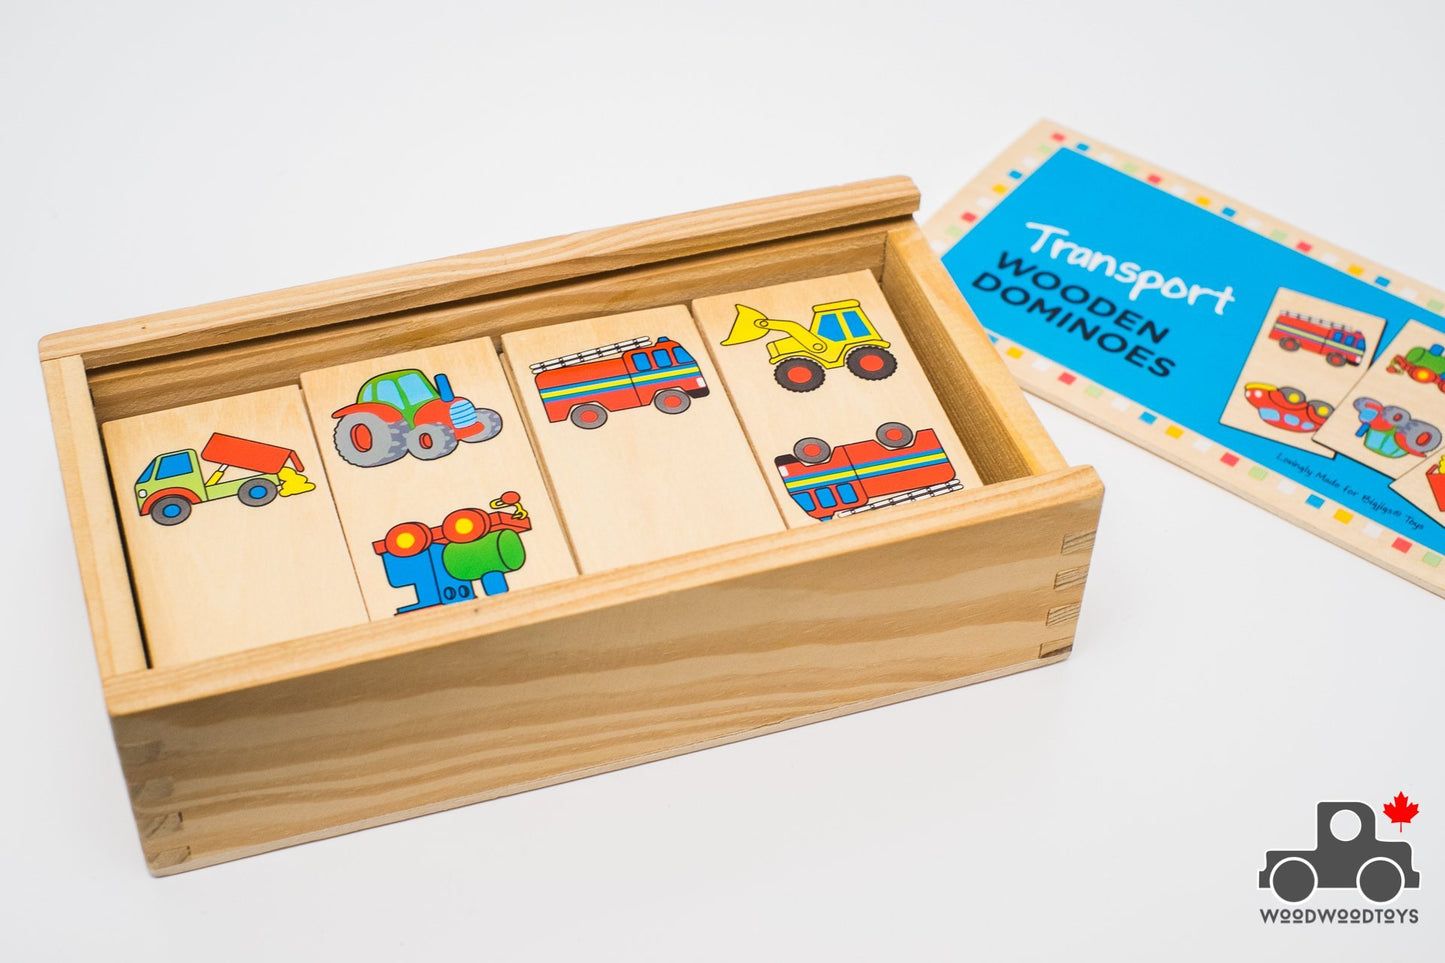 Bigjigs Toys Transport Dominoes - Wood Wood Toys Canada's Favourite Montessori Toy Store